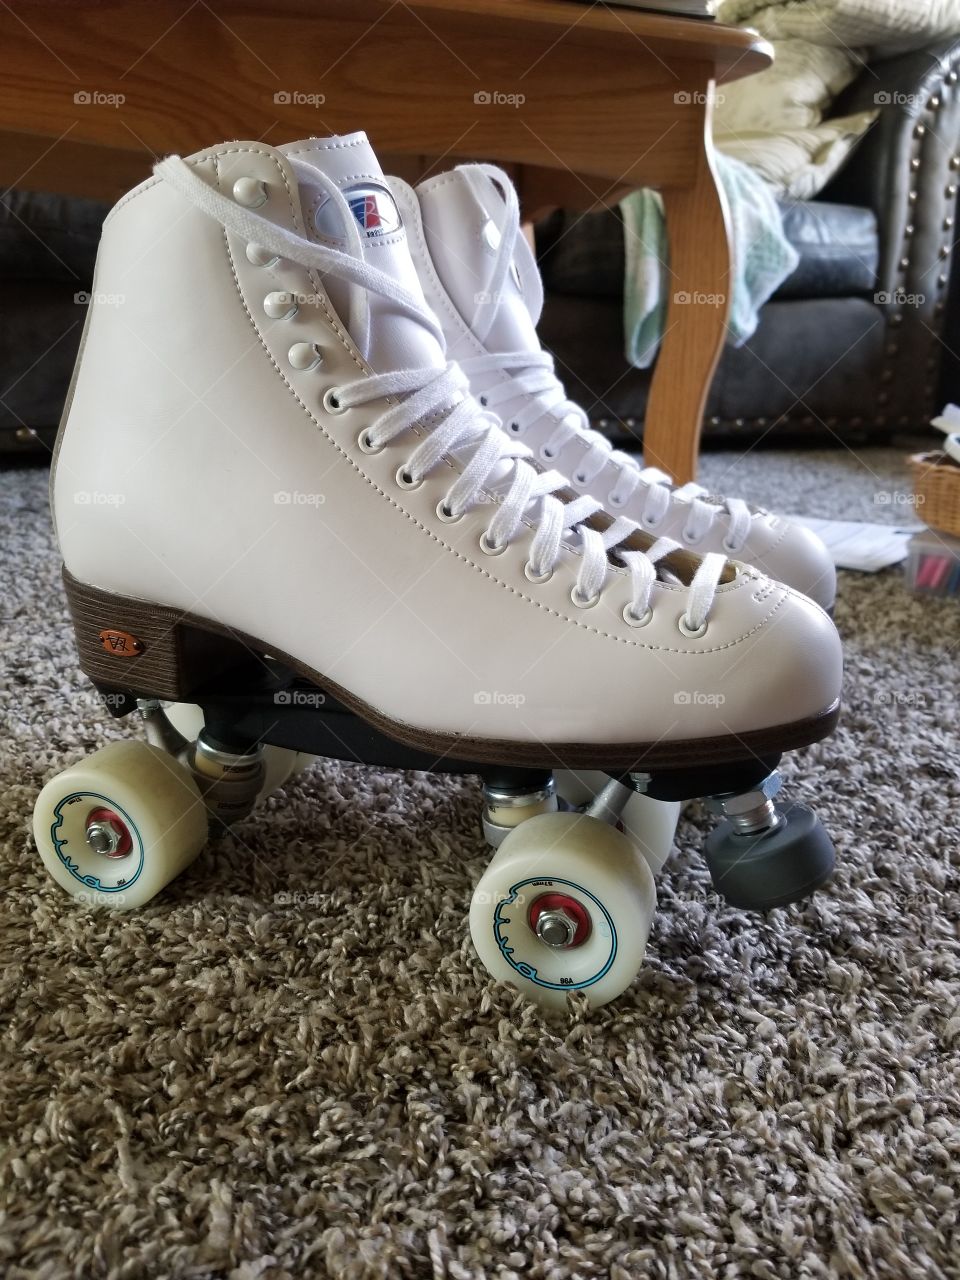 Why not go back to the good old days where everyone rode around on skates?